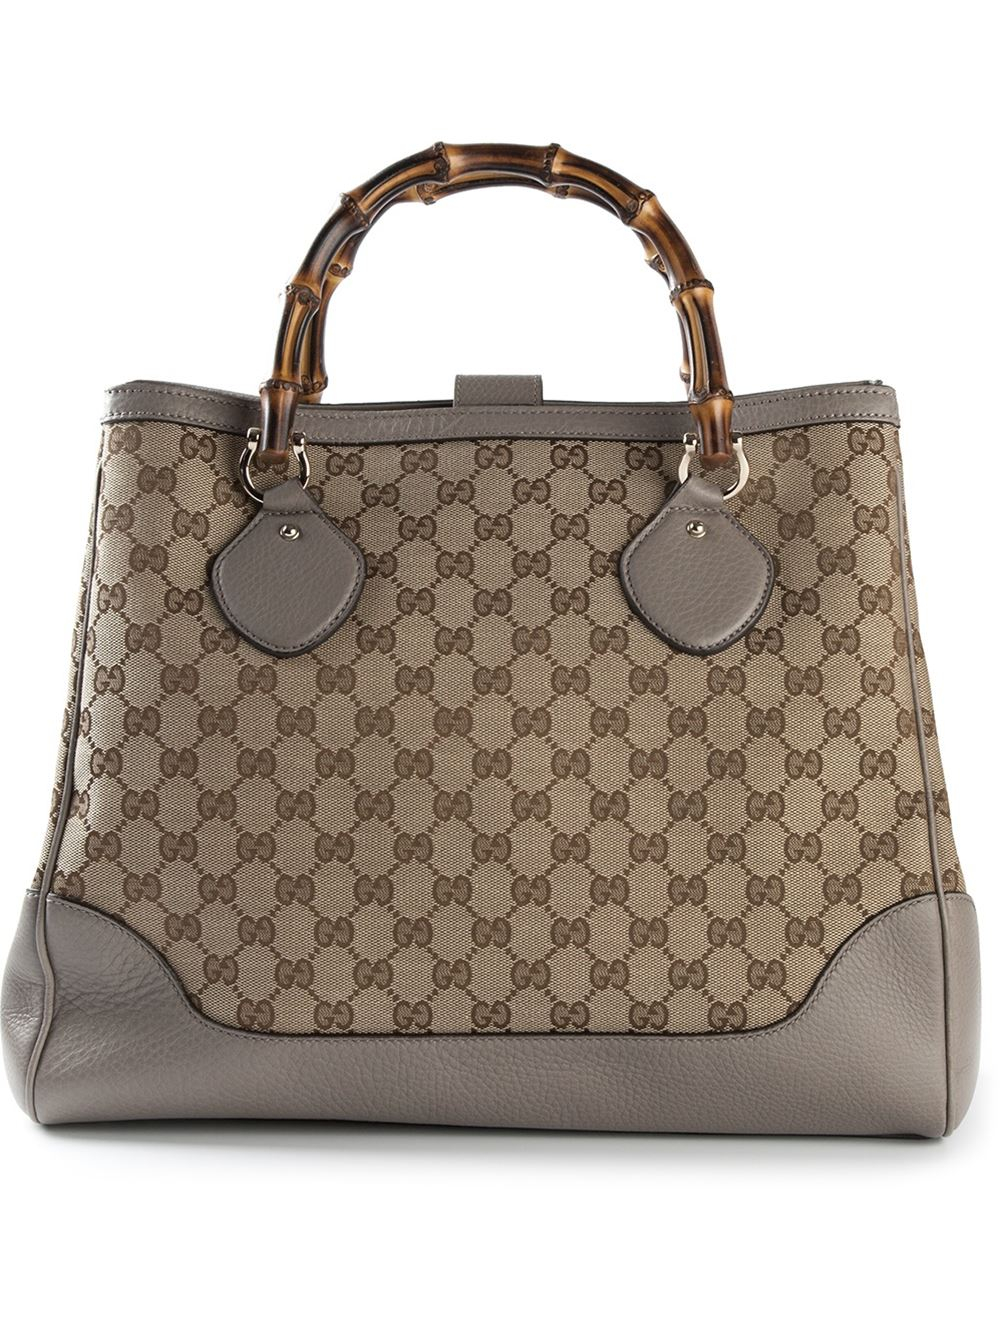 Lyst - Gucci Signature Monogram Wooden Handle Tote in Natural